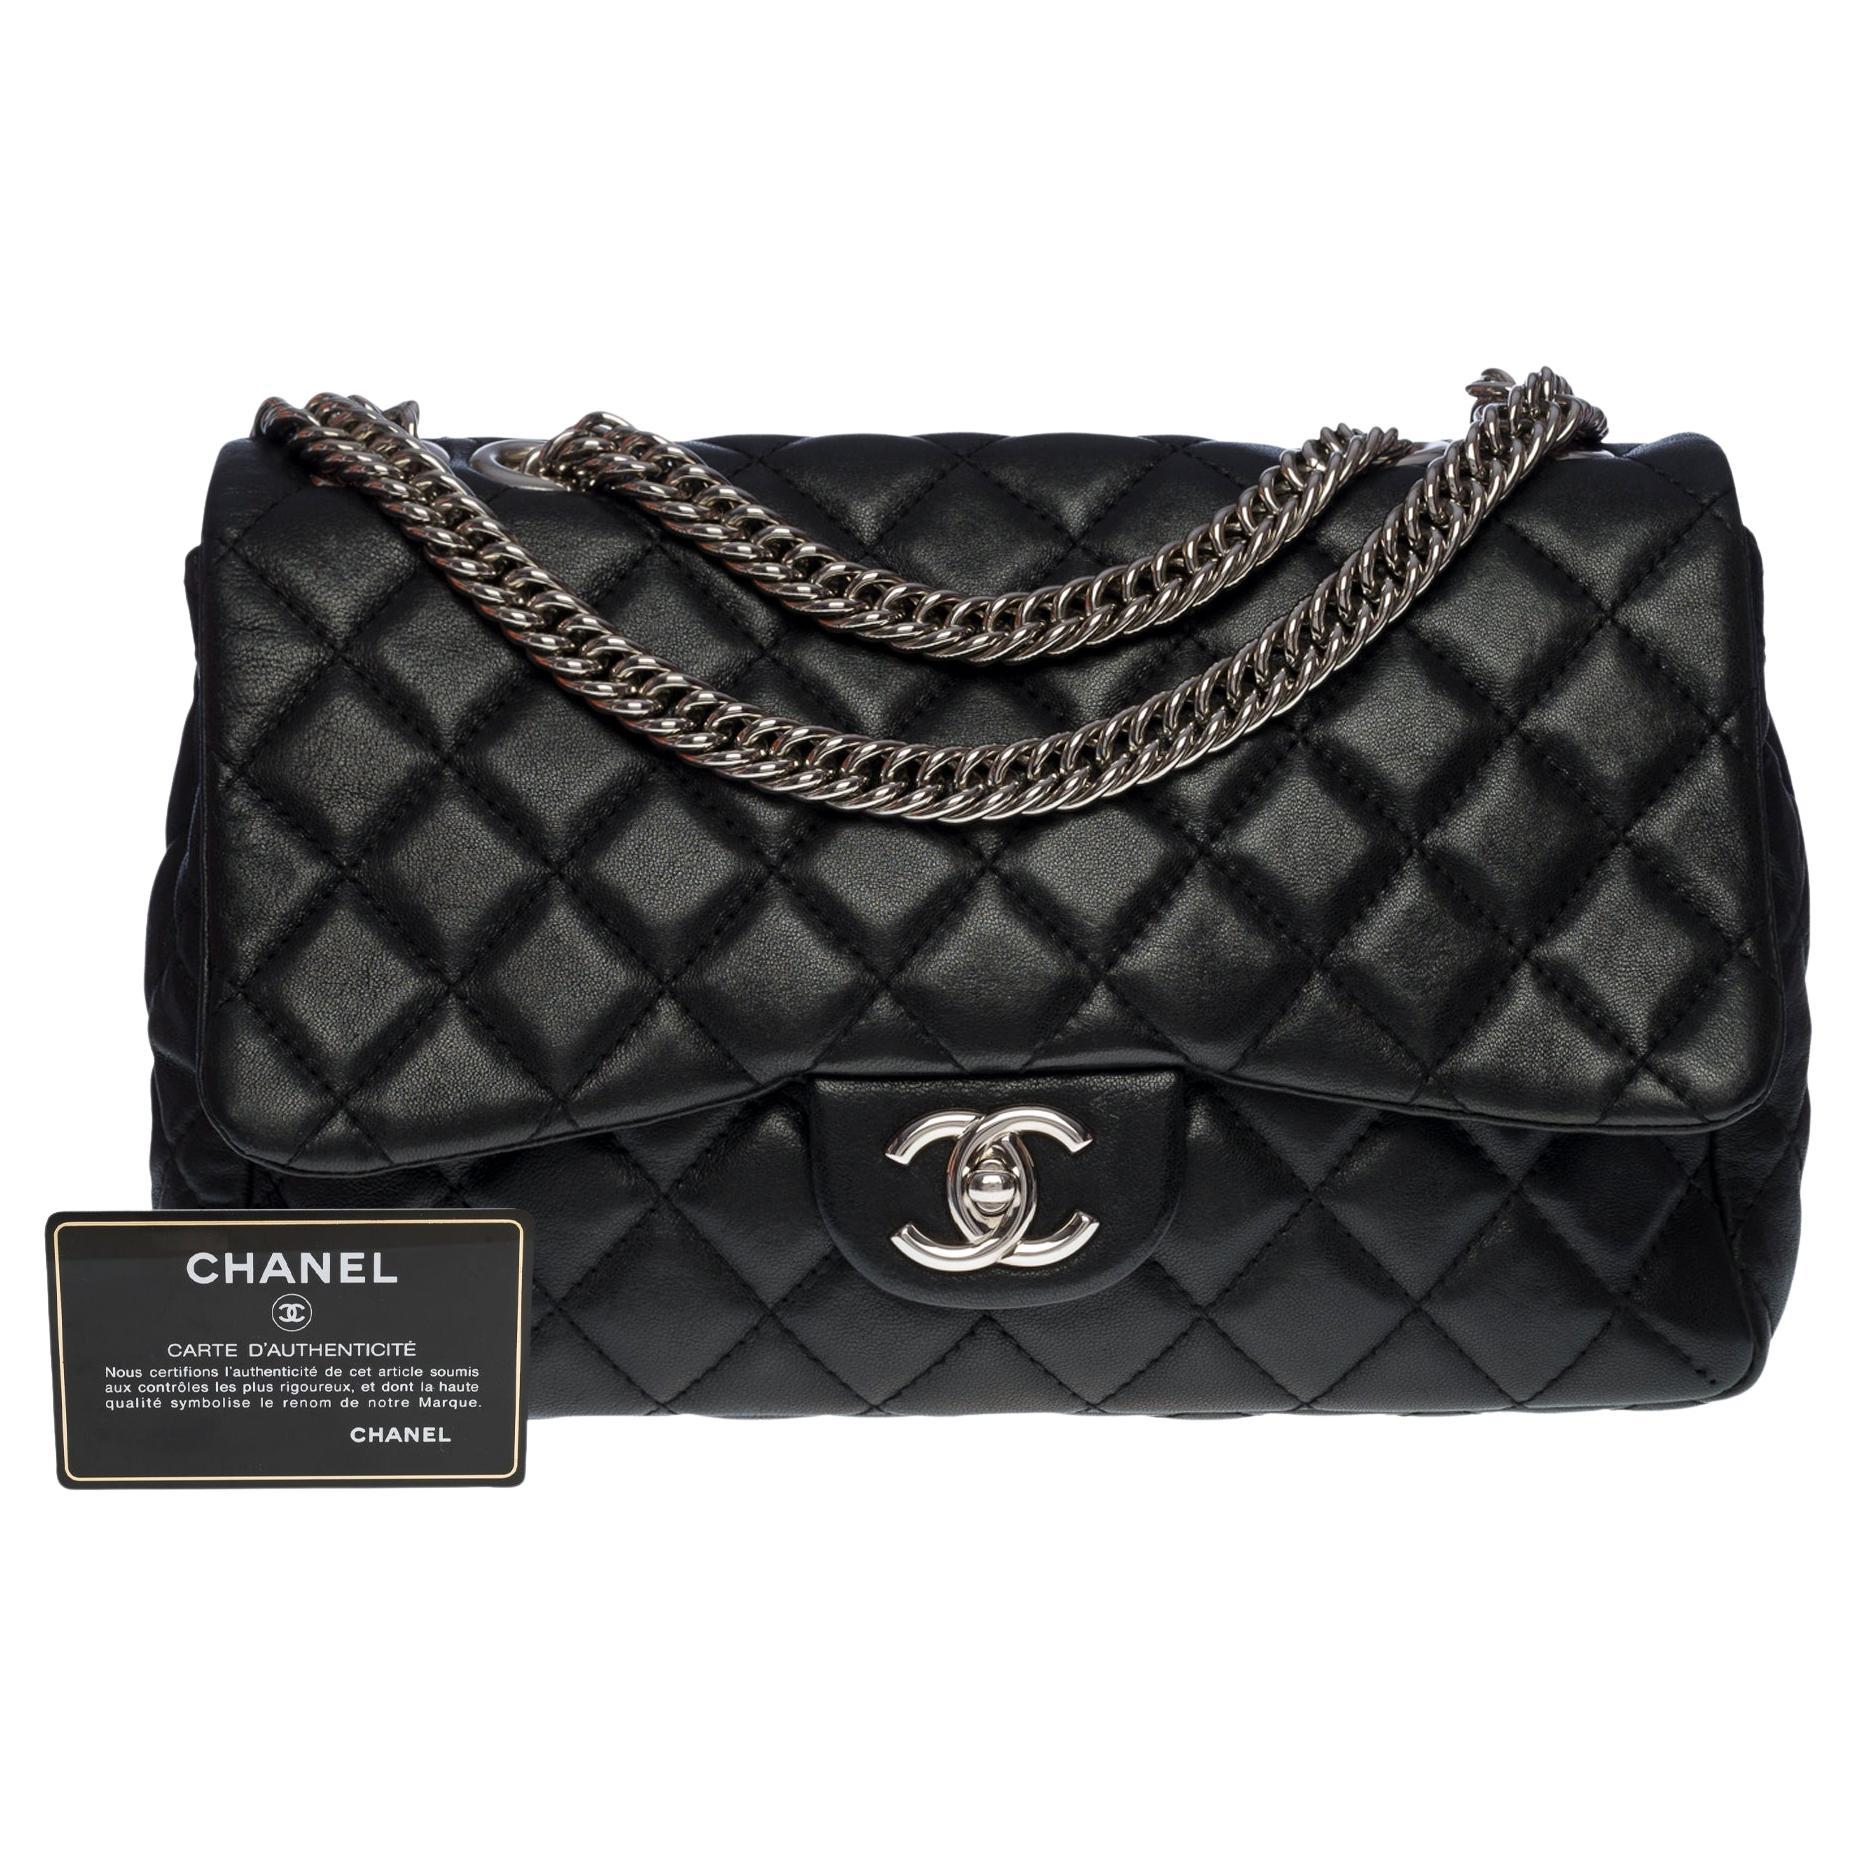 Chanel Timeless/Classic Jumbo single flap shoulder bag in black leather, SHW